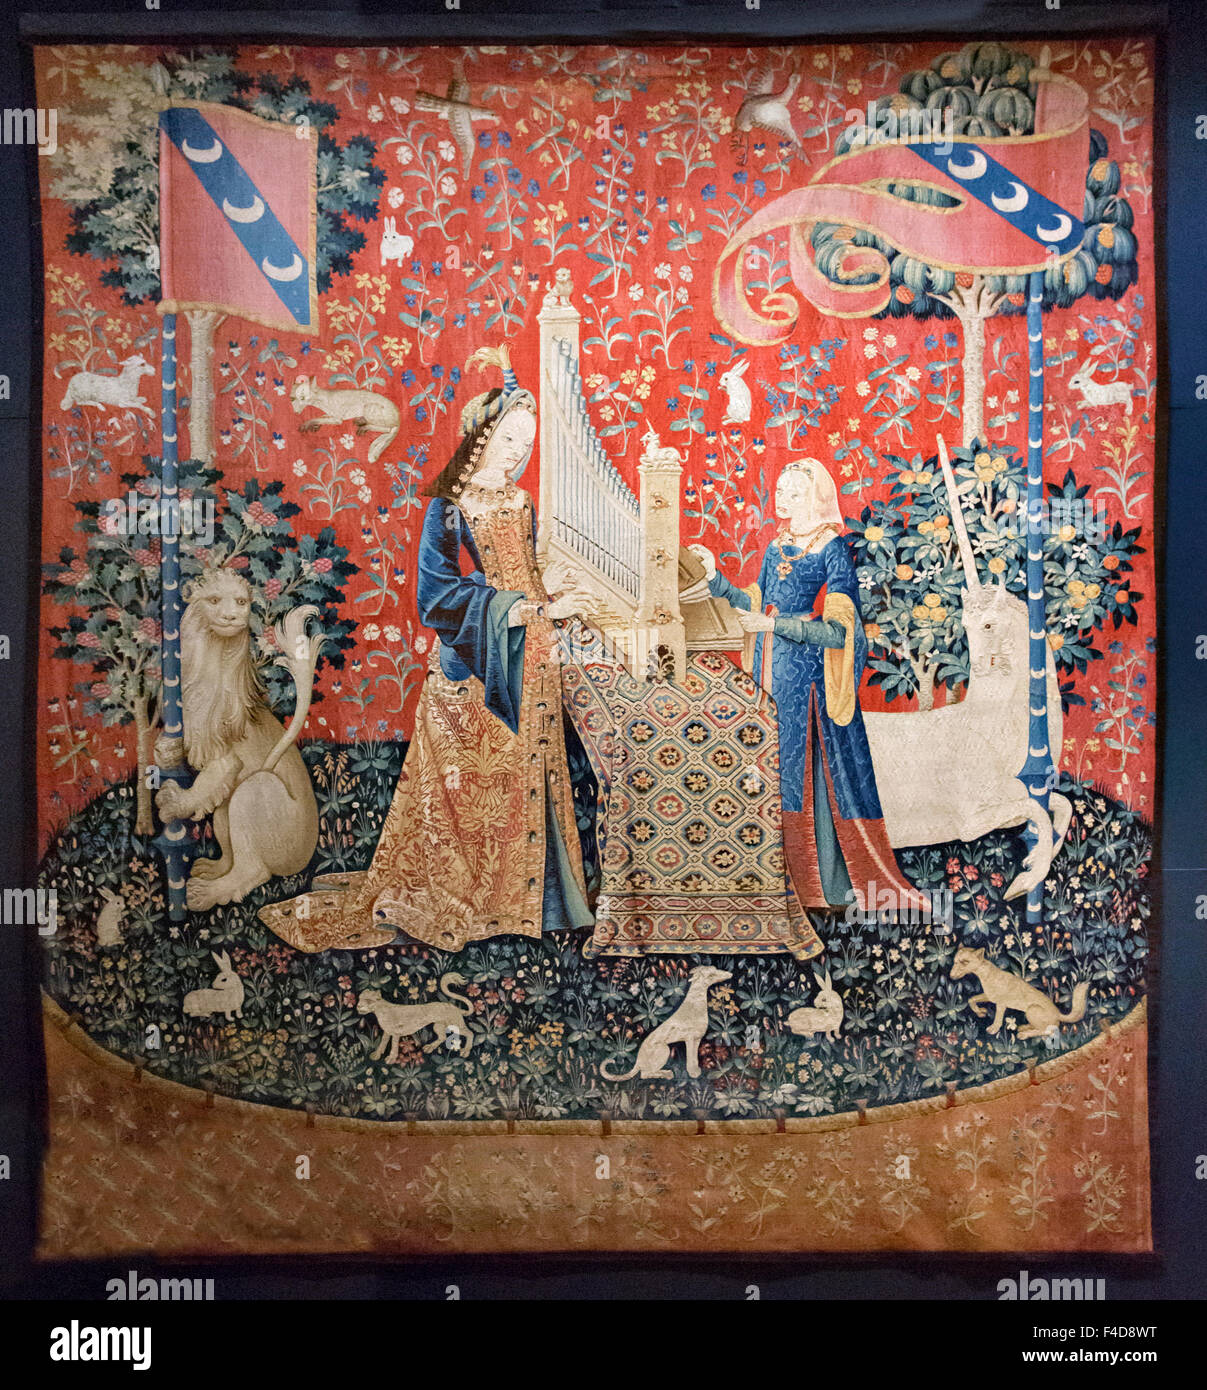 Europe, France, Paris. One of the six Lady and the Unicorn tapestries in the Cluny Museum of the Middle Ages. It dates from about 1500 CE and concerns the sense of hearing. Stock Photo